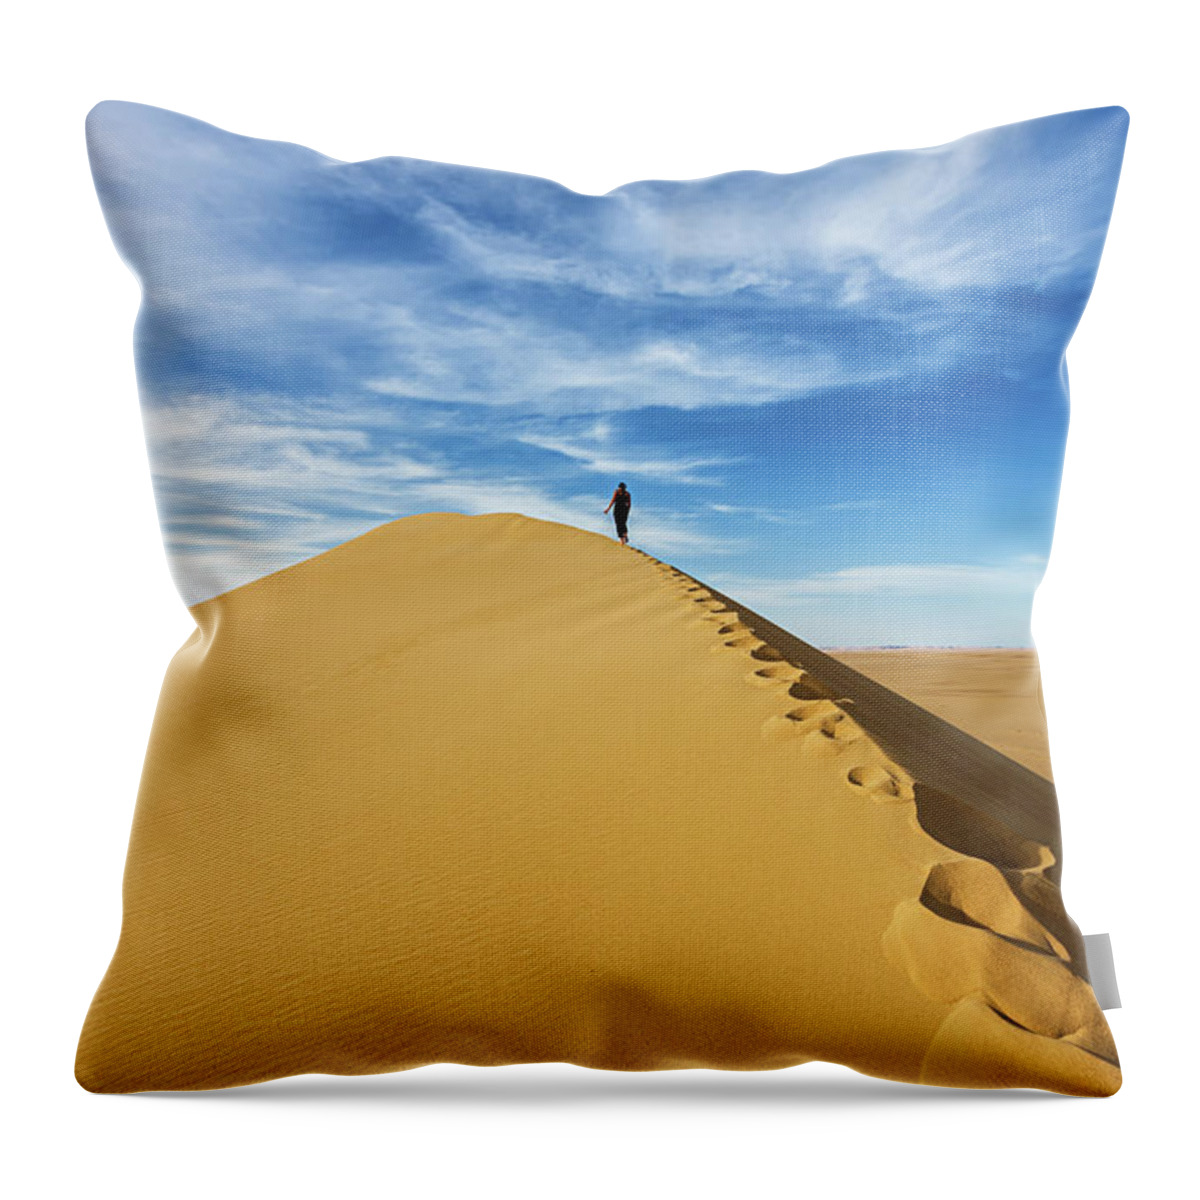 Scenics Throw Pillow featuring the photograph Female Tourist Standing On The Top Of by Hadynyah